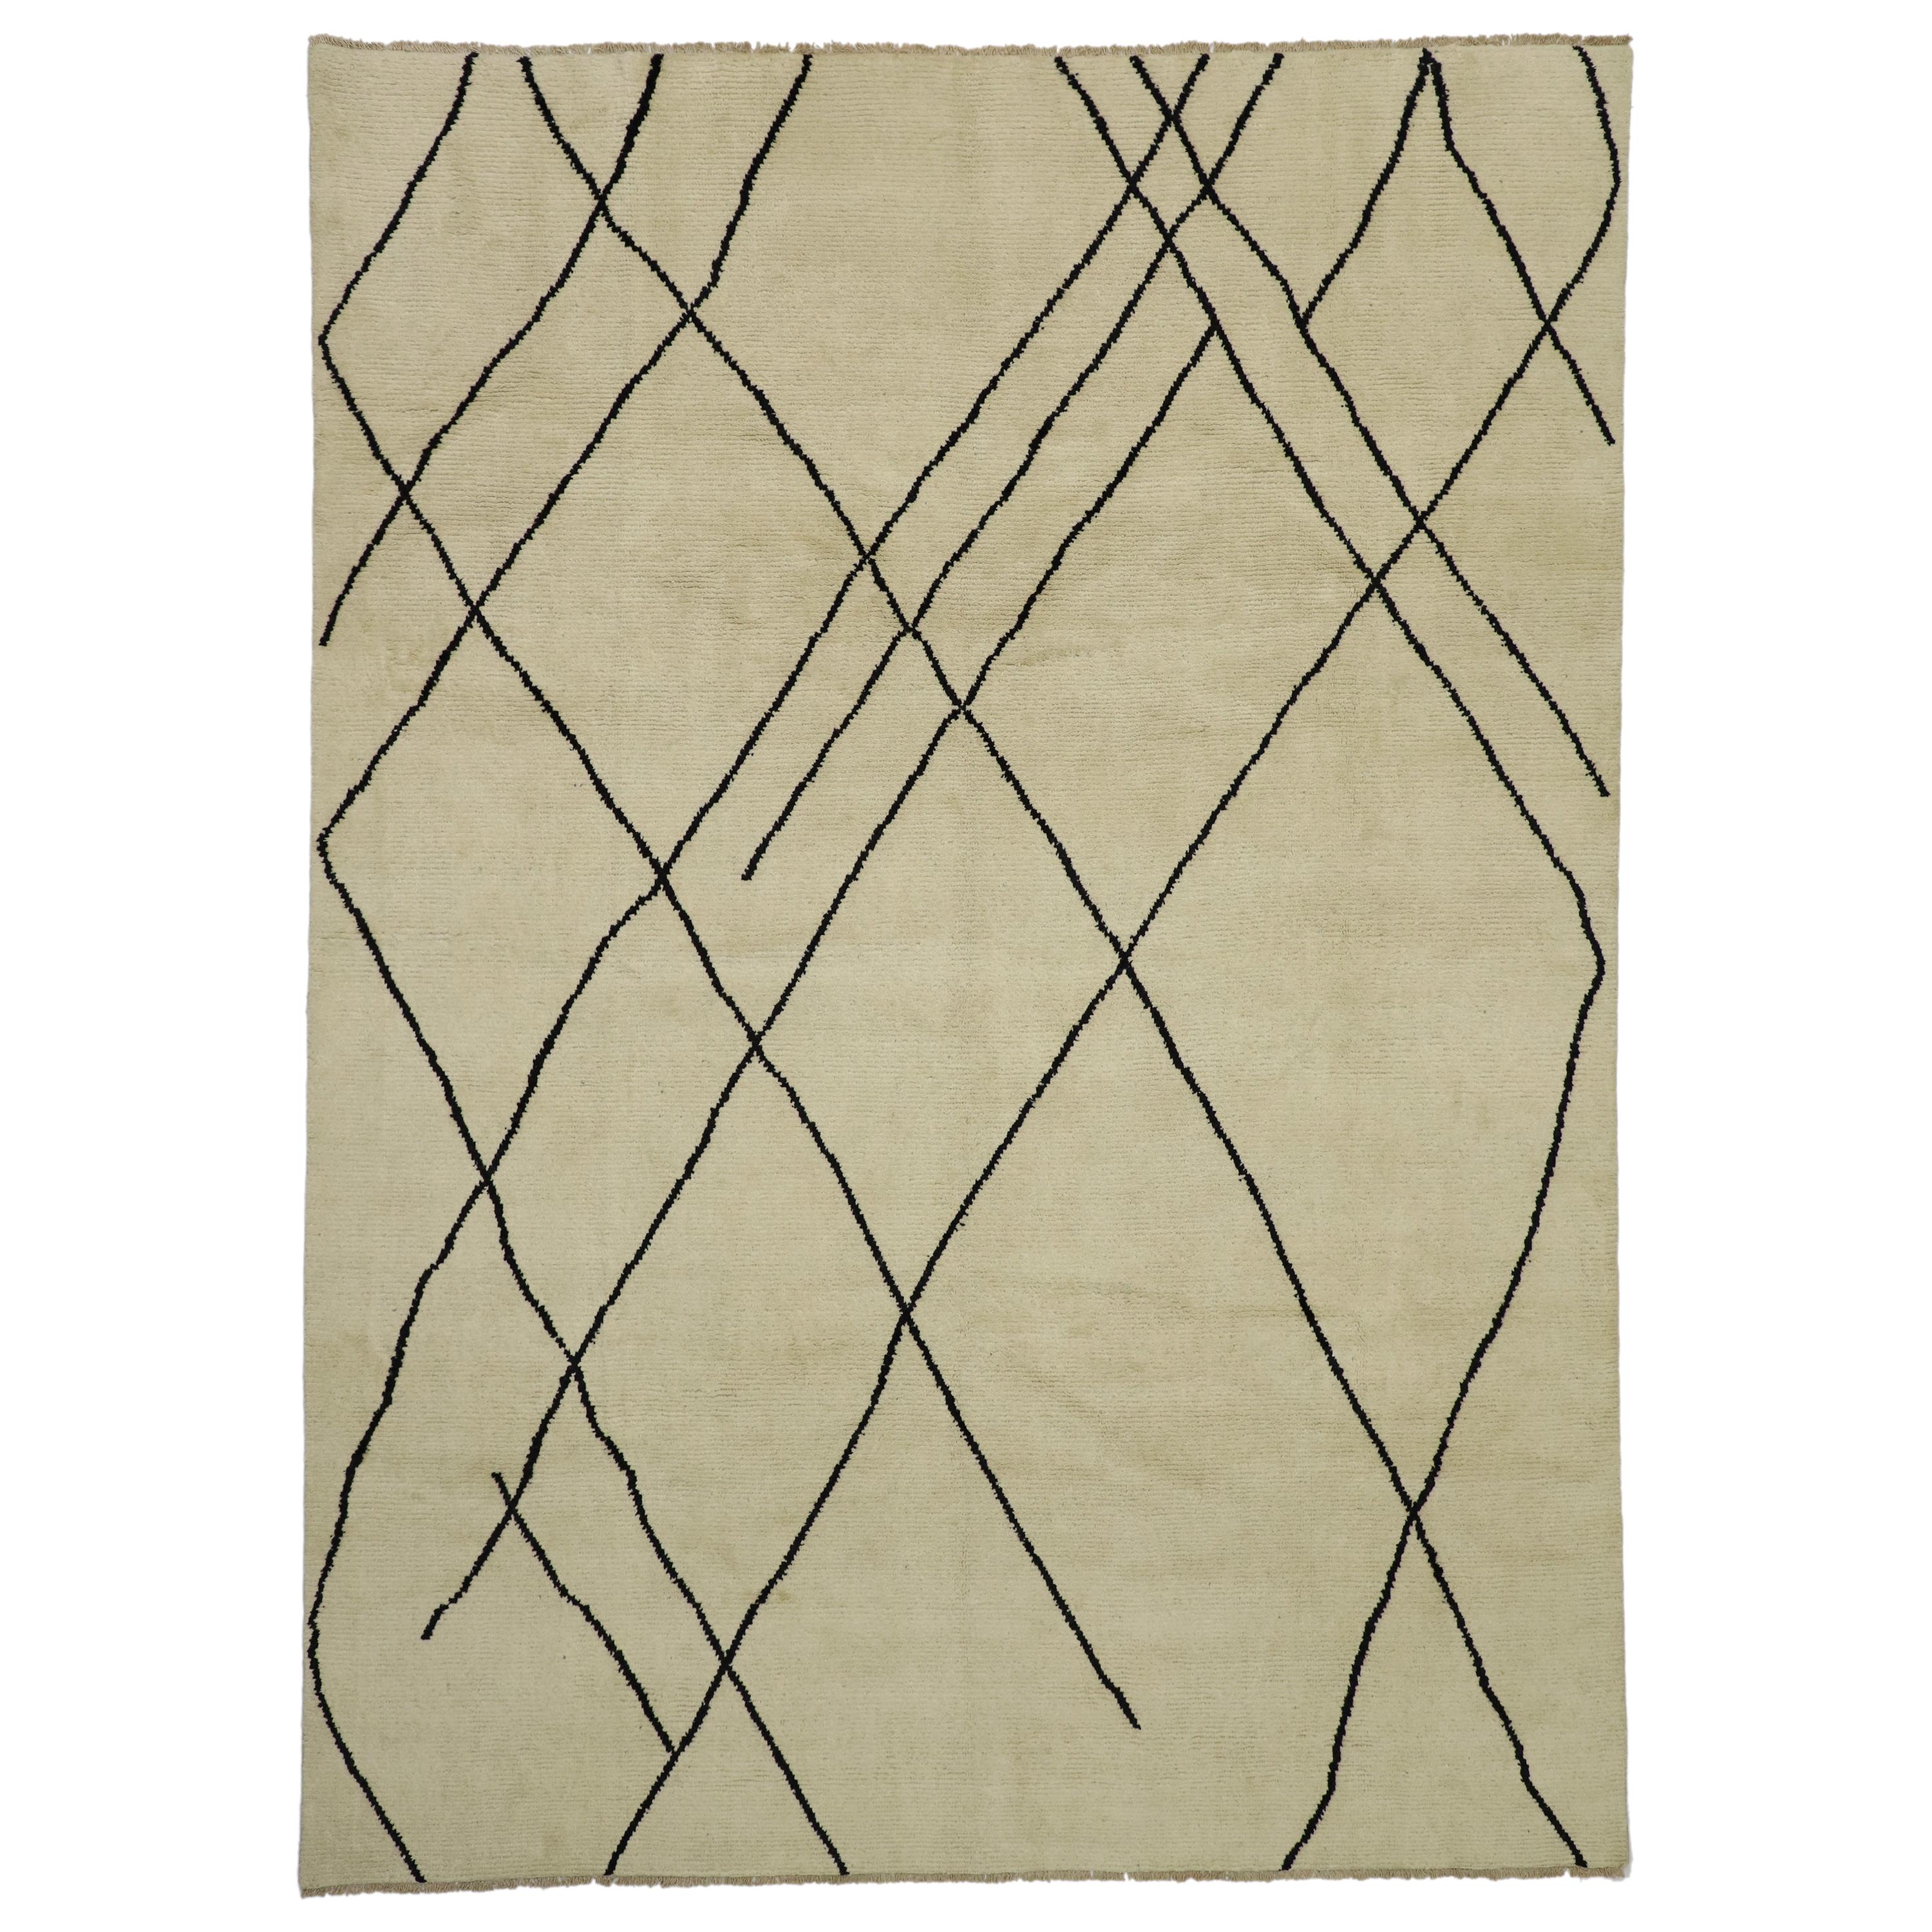 New Contemporary Moroccan Area Rug with Modern Style